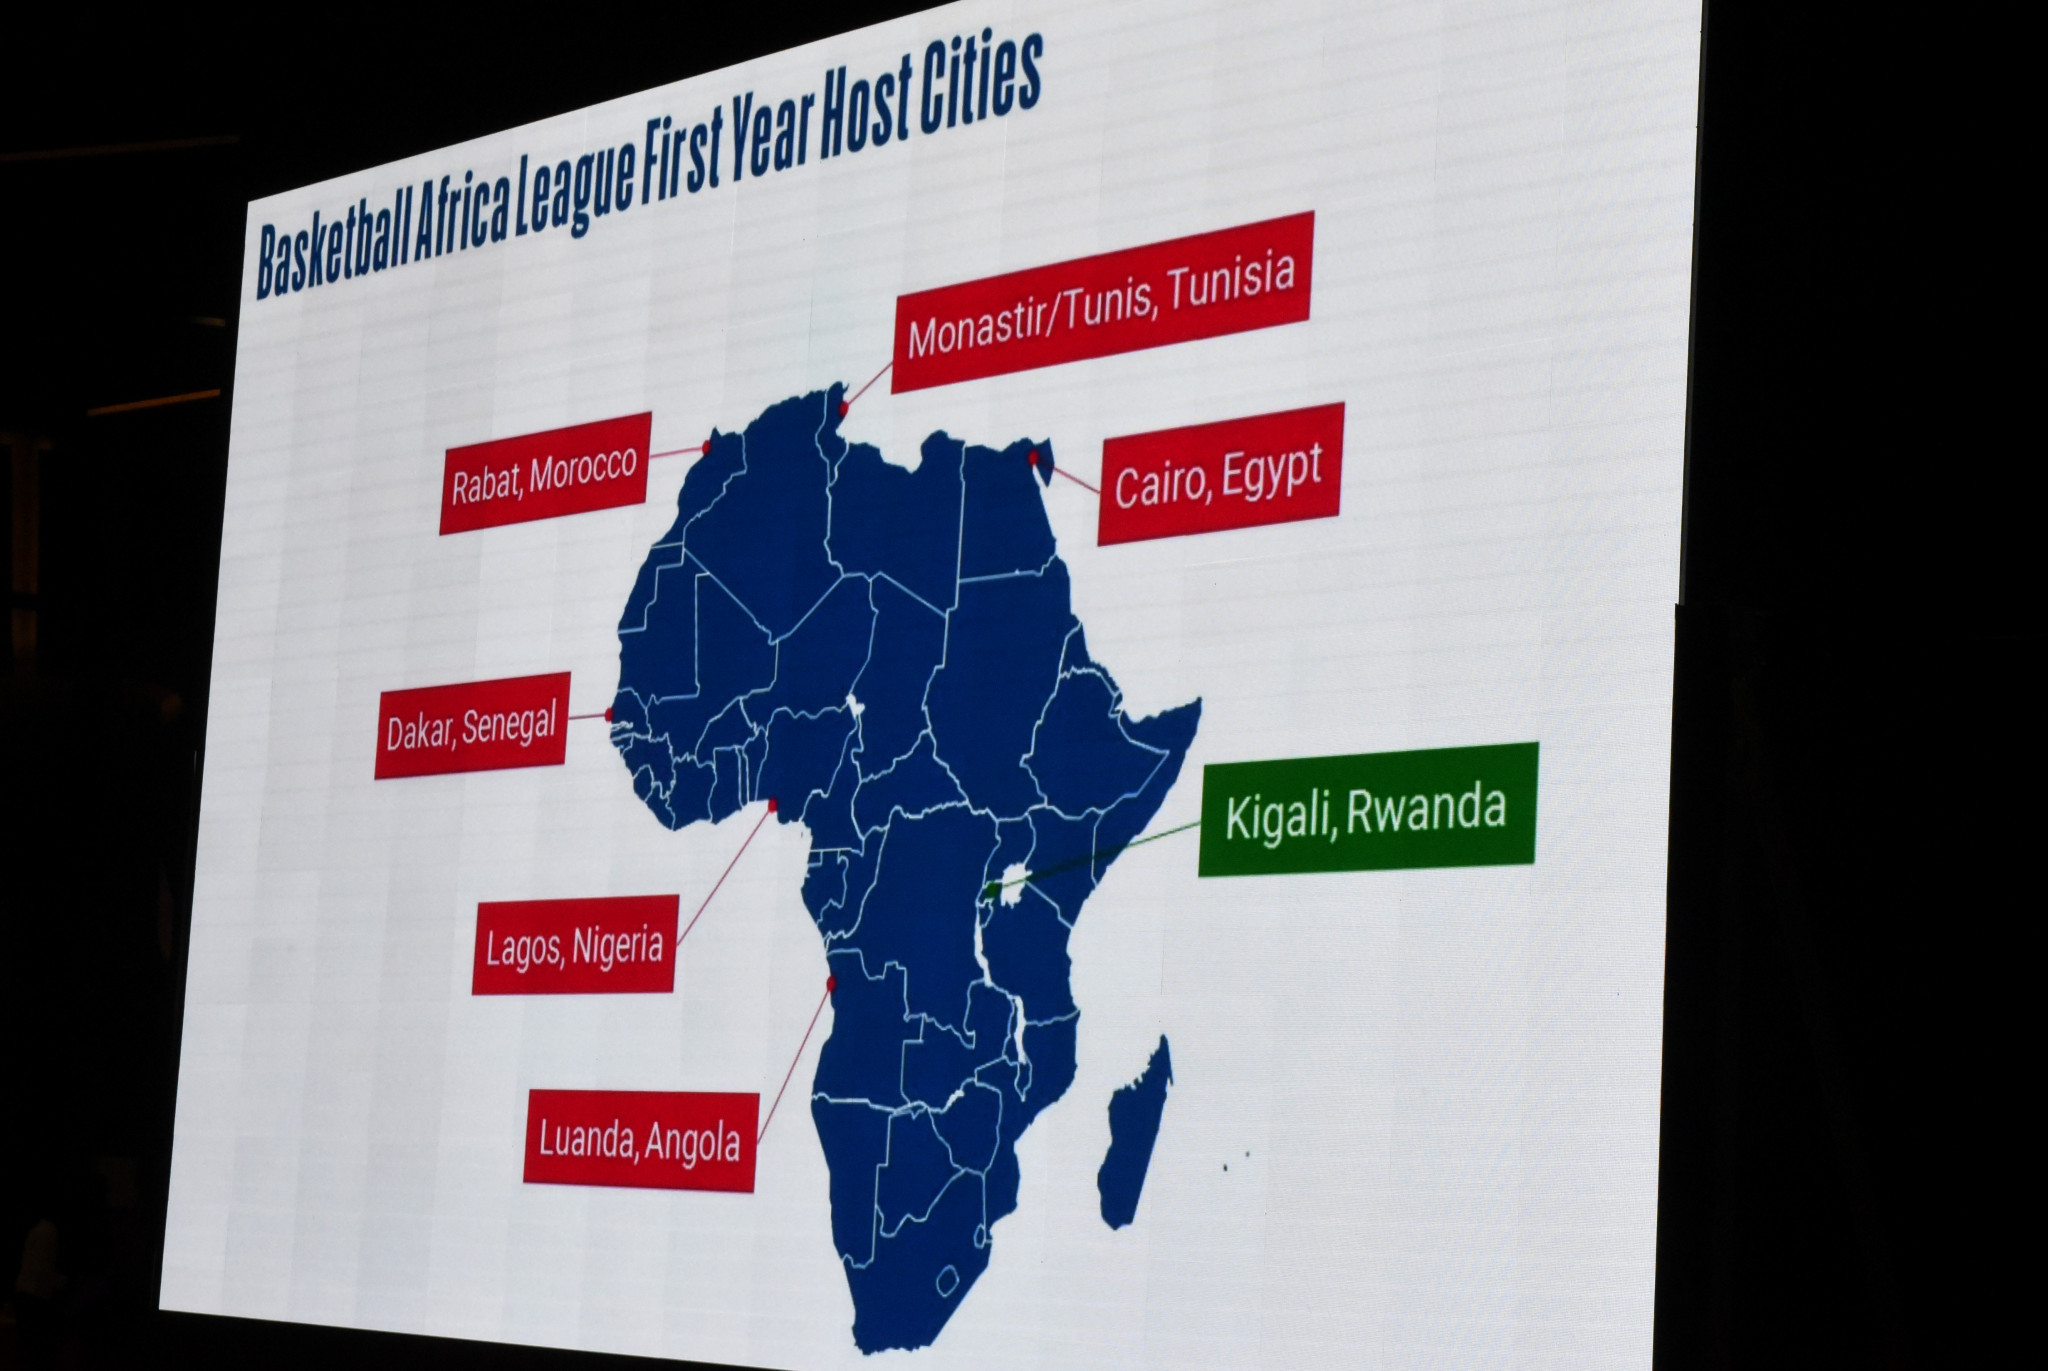 The National Basketball Association (NBA) have announced the host cities for the inaugural season of the Basketball Africa League (BAL) ©Getty Images